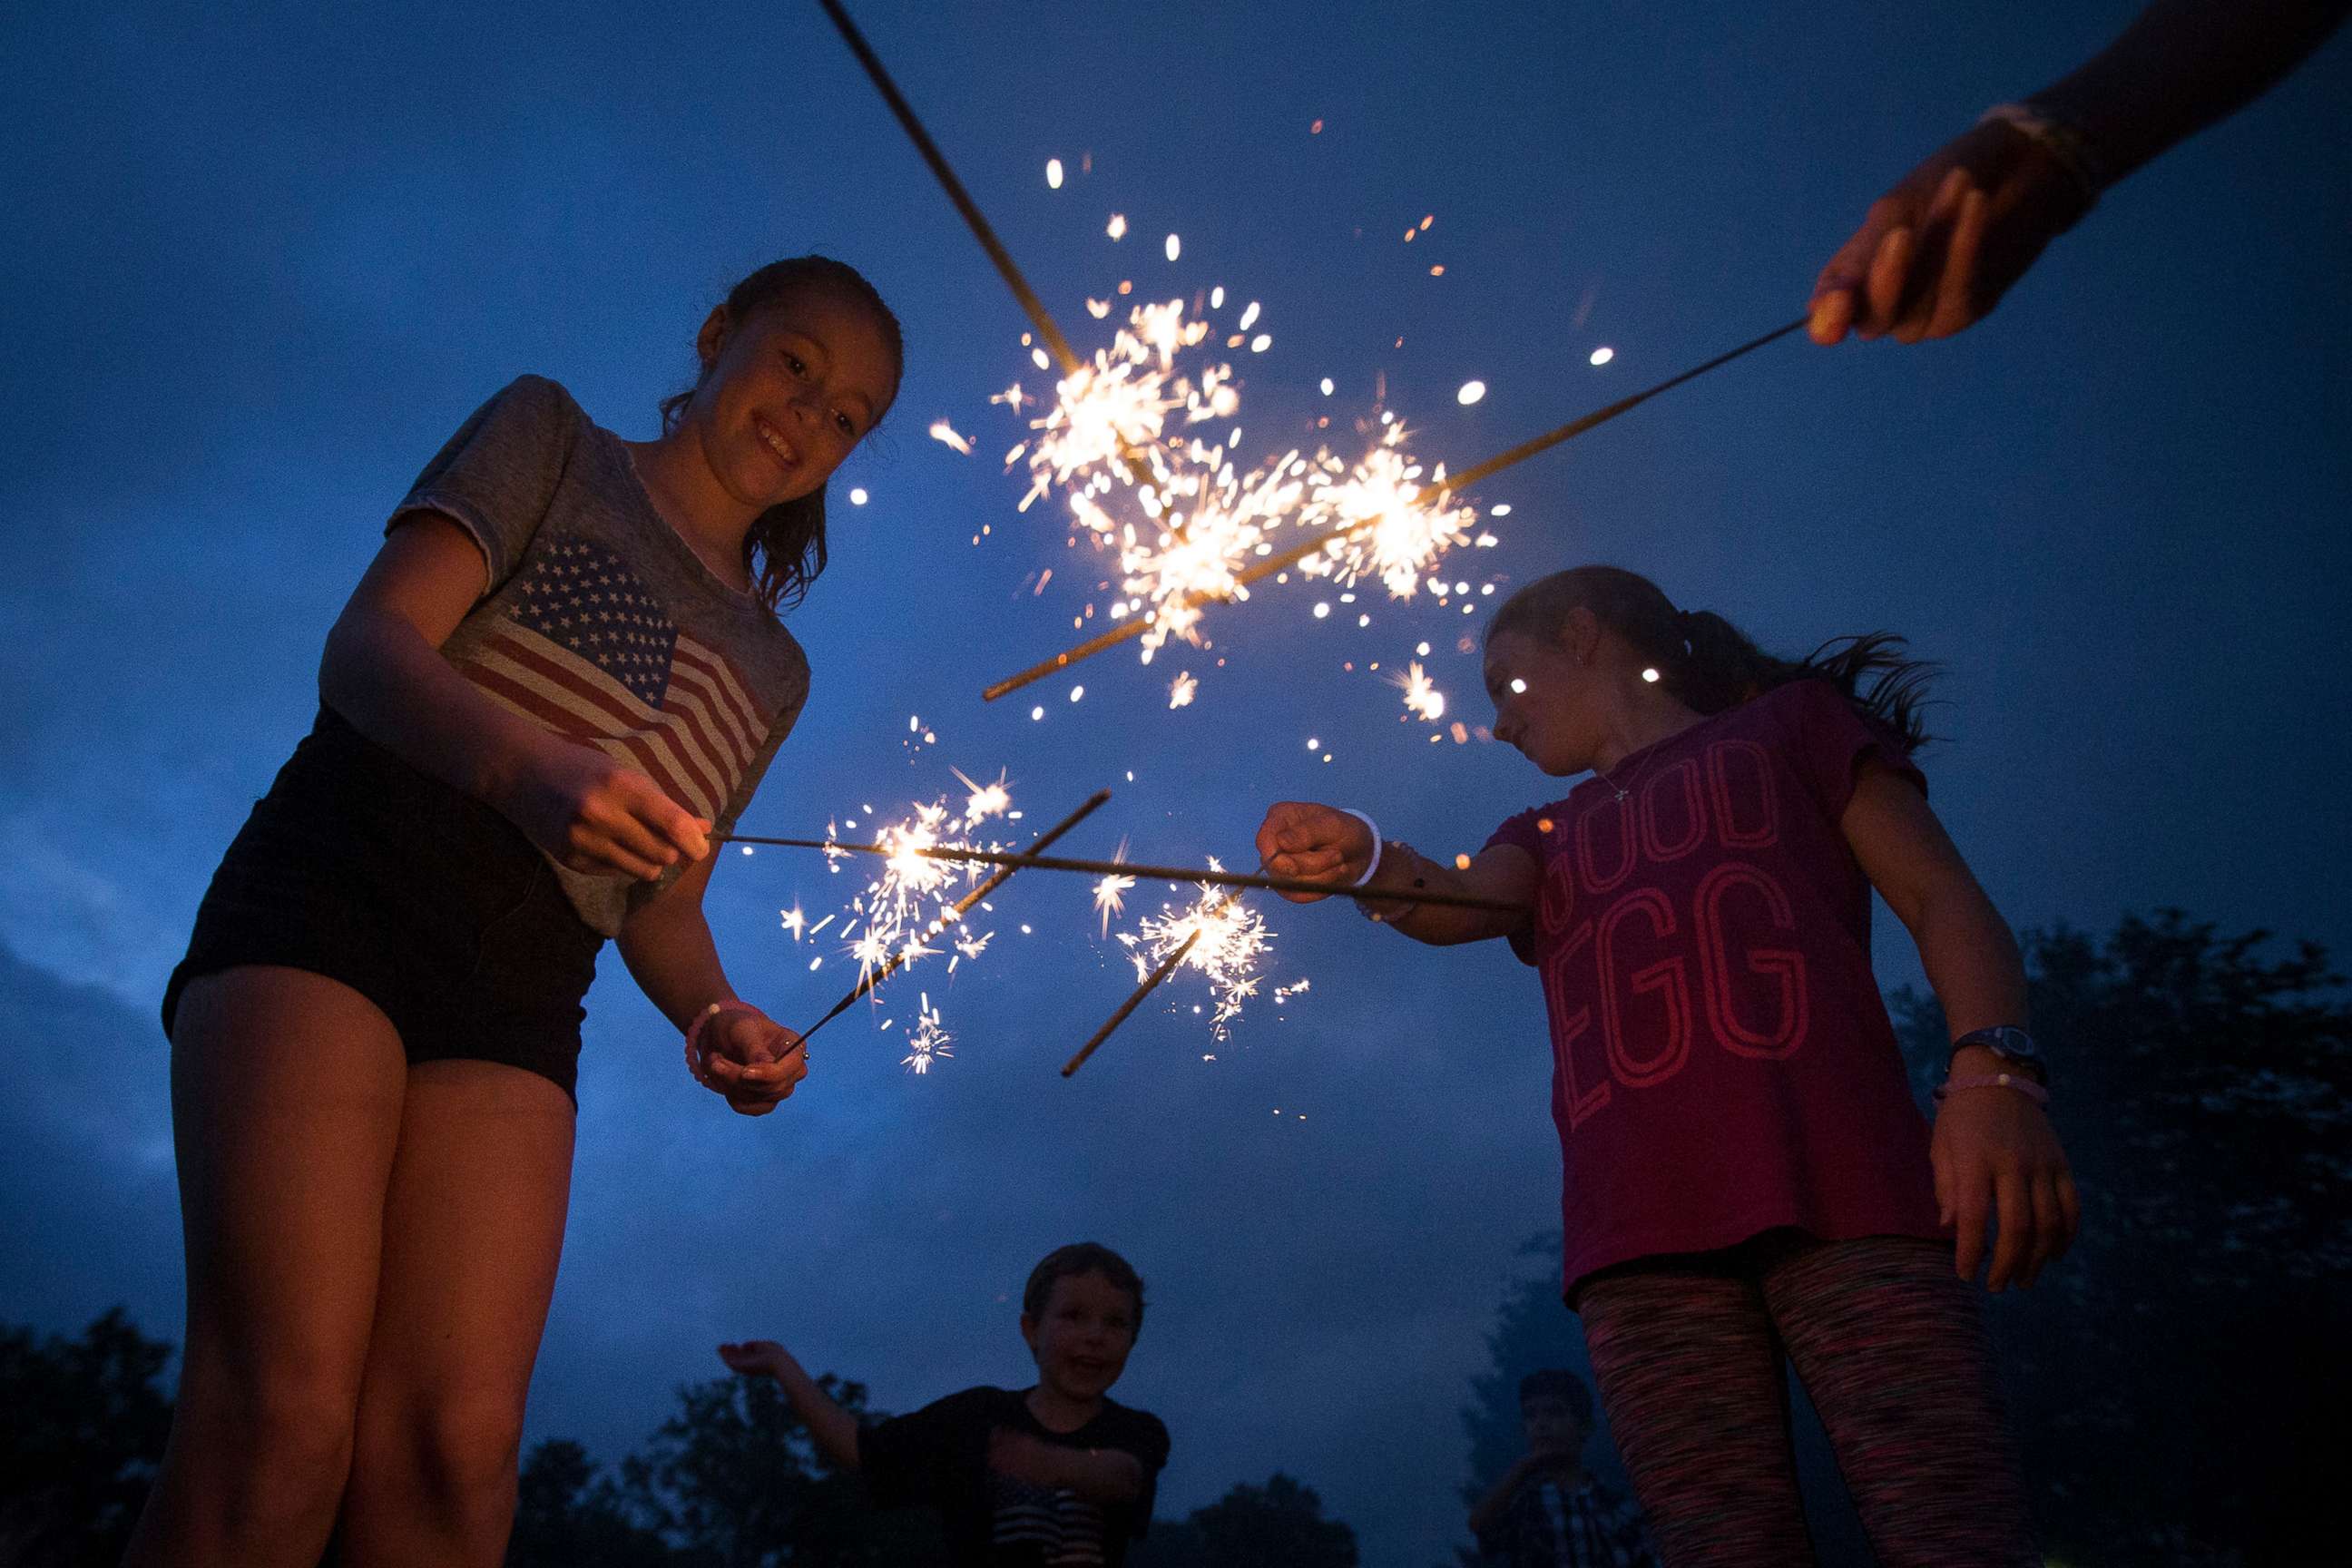 PHOTO: In this file photo, Lila Flynn-Tonbragel, left, plays with sparklers as she waits for Fourth of July fireworks to begin at Ault Park, on July 4, 2016, in Cincinnati.